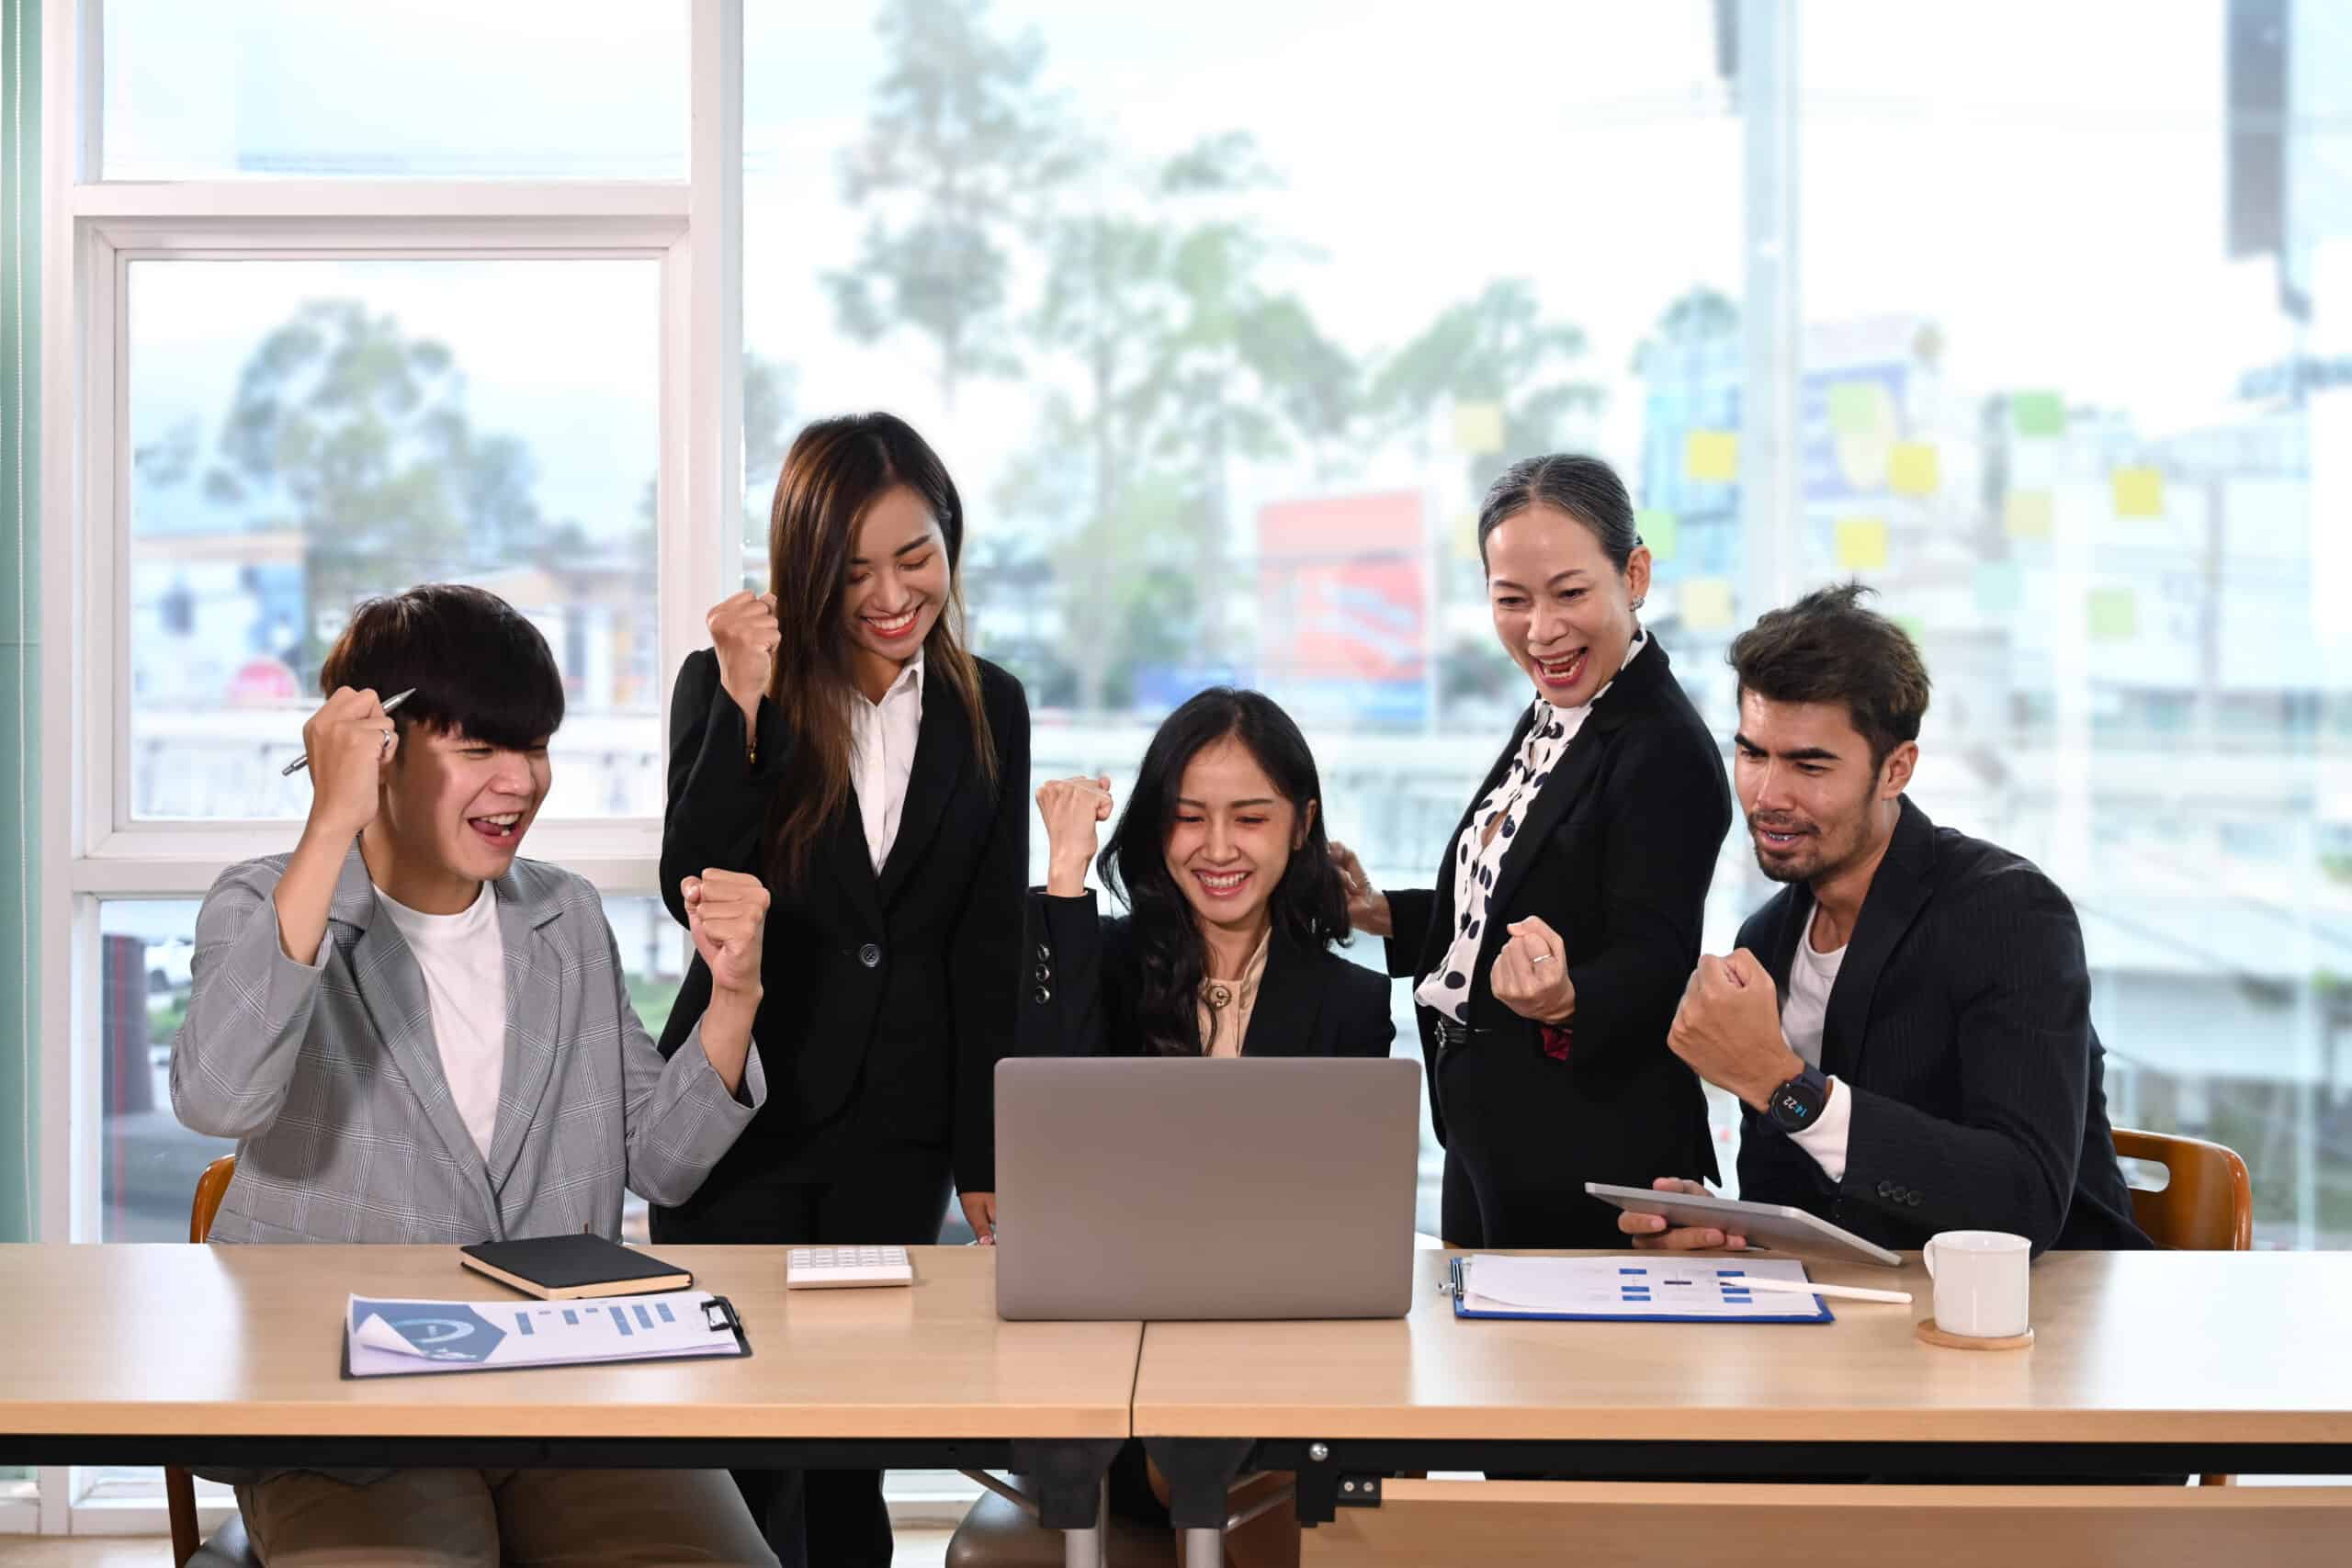 Diverse employees celebrating business success or victory together in office.